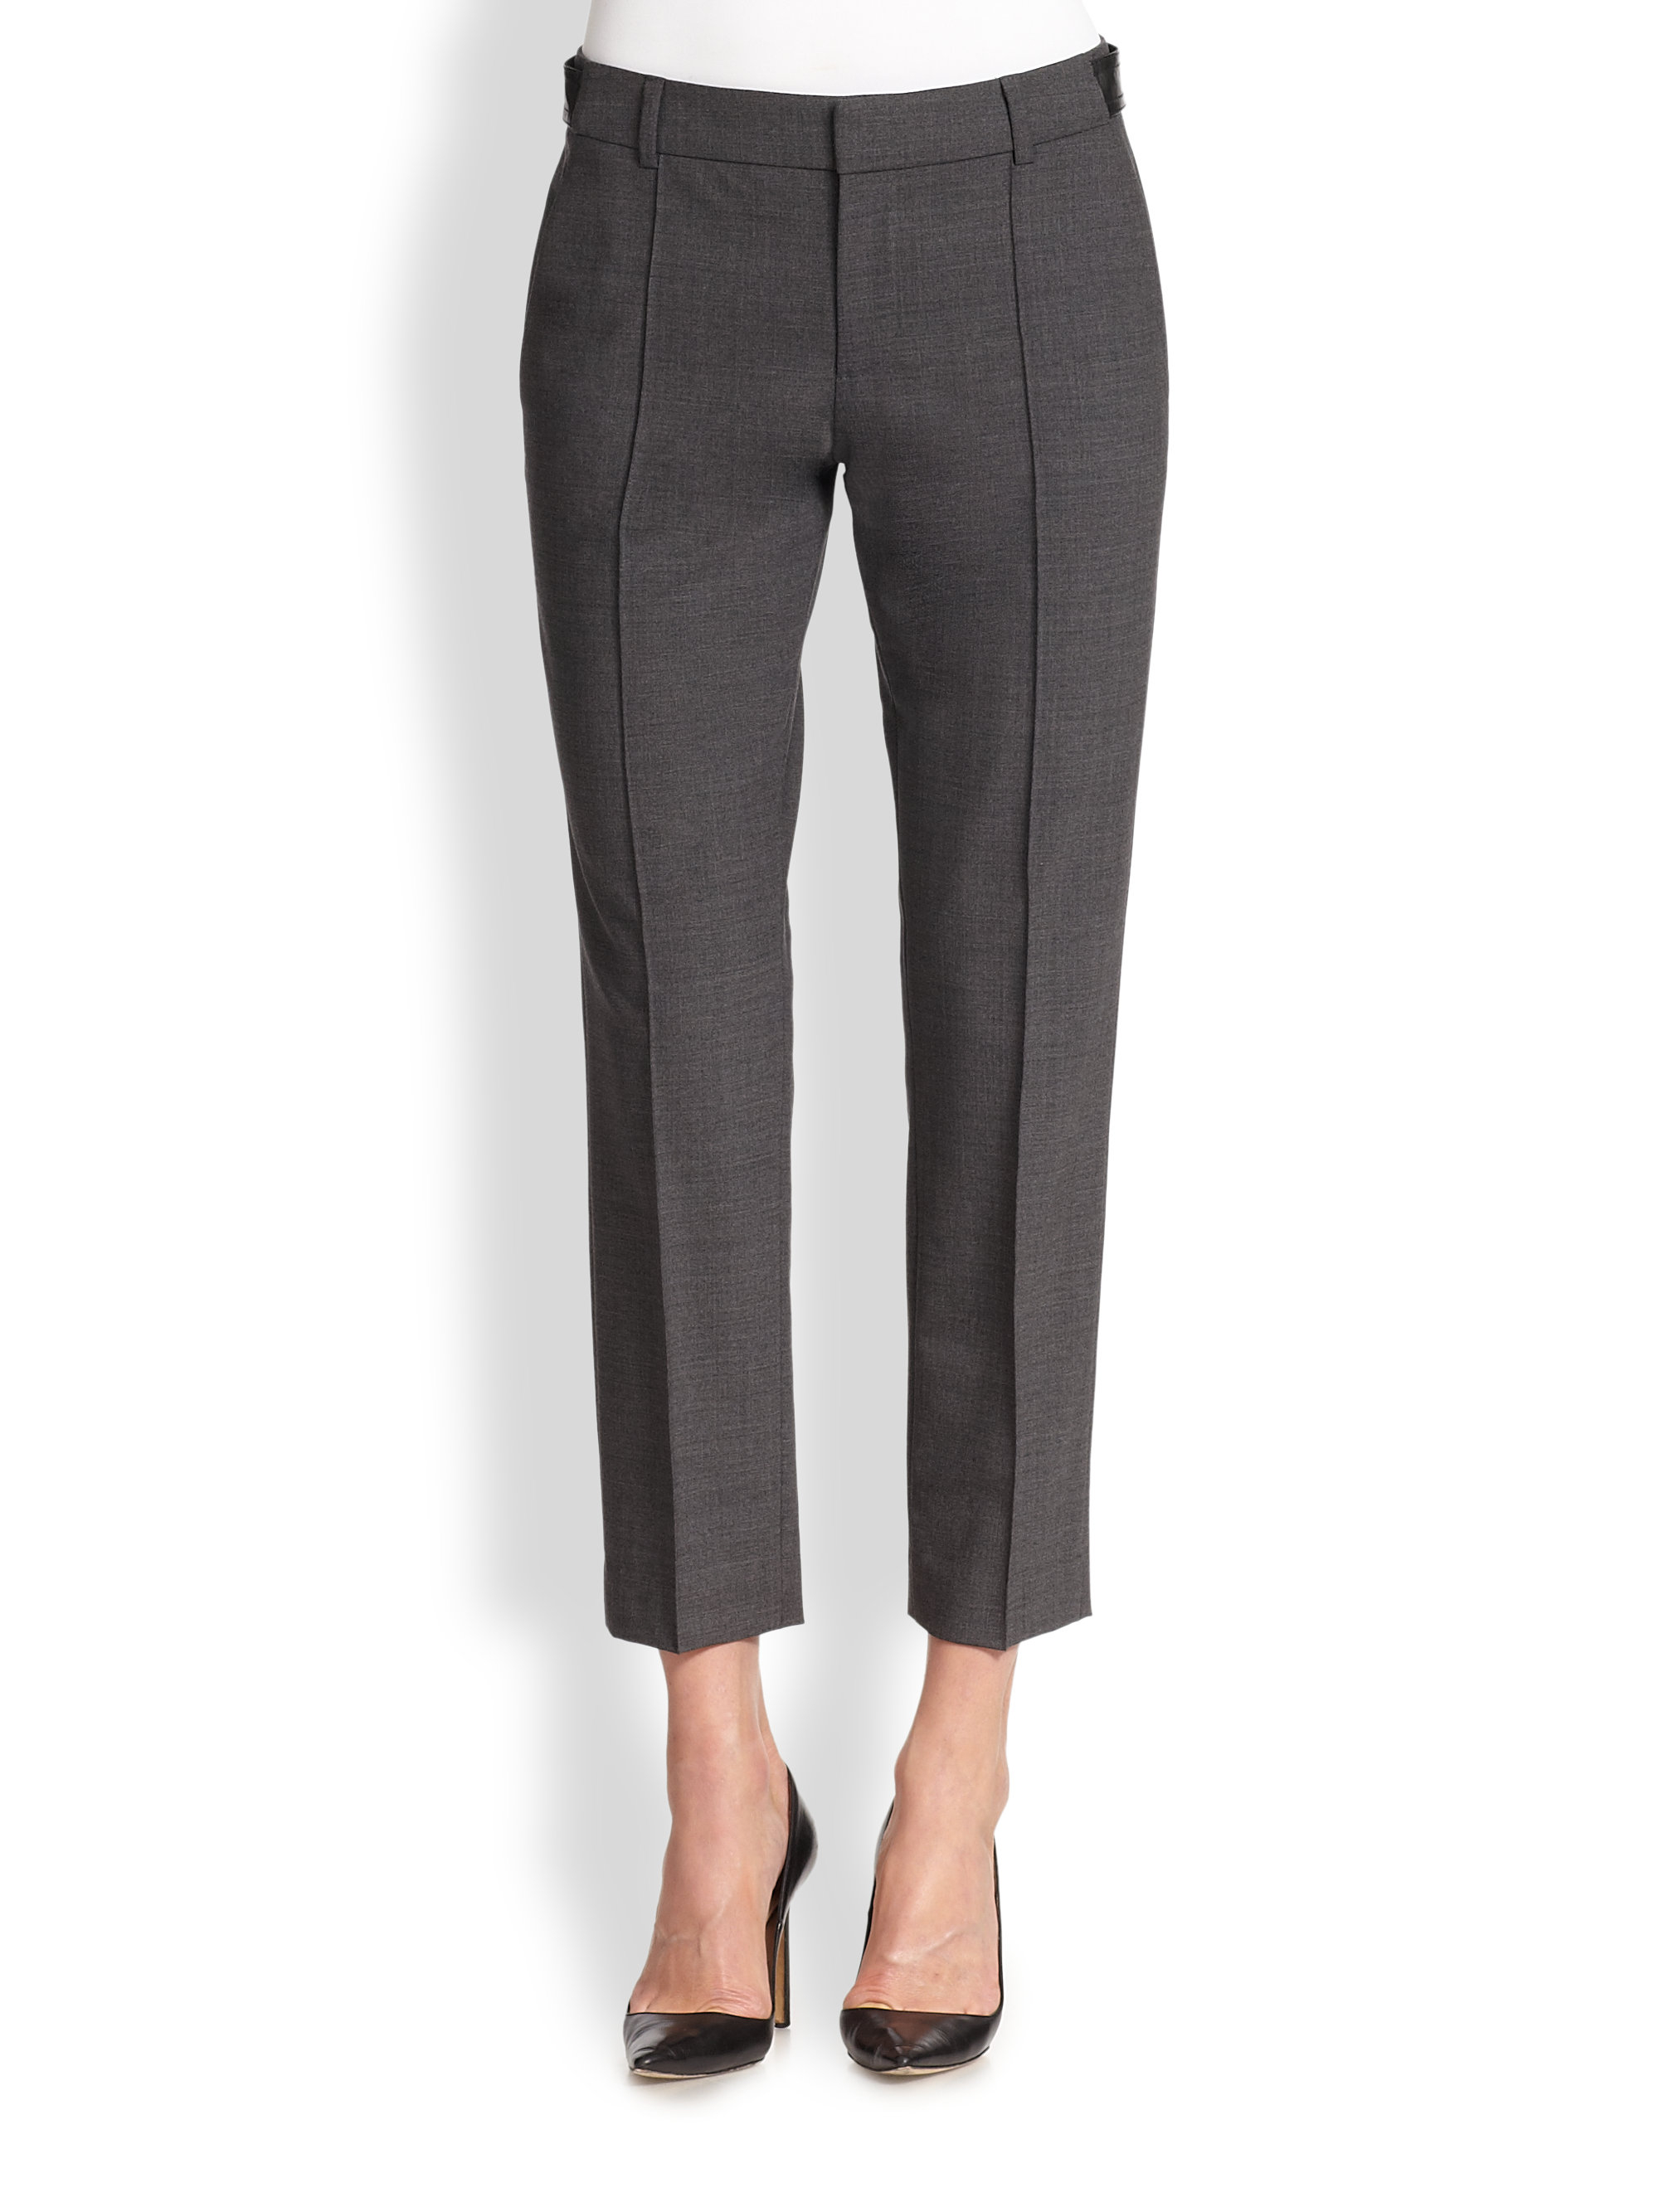 Lyst - Vince Pintuck Leather Tab Crop Pants in Gray